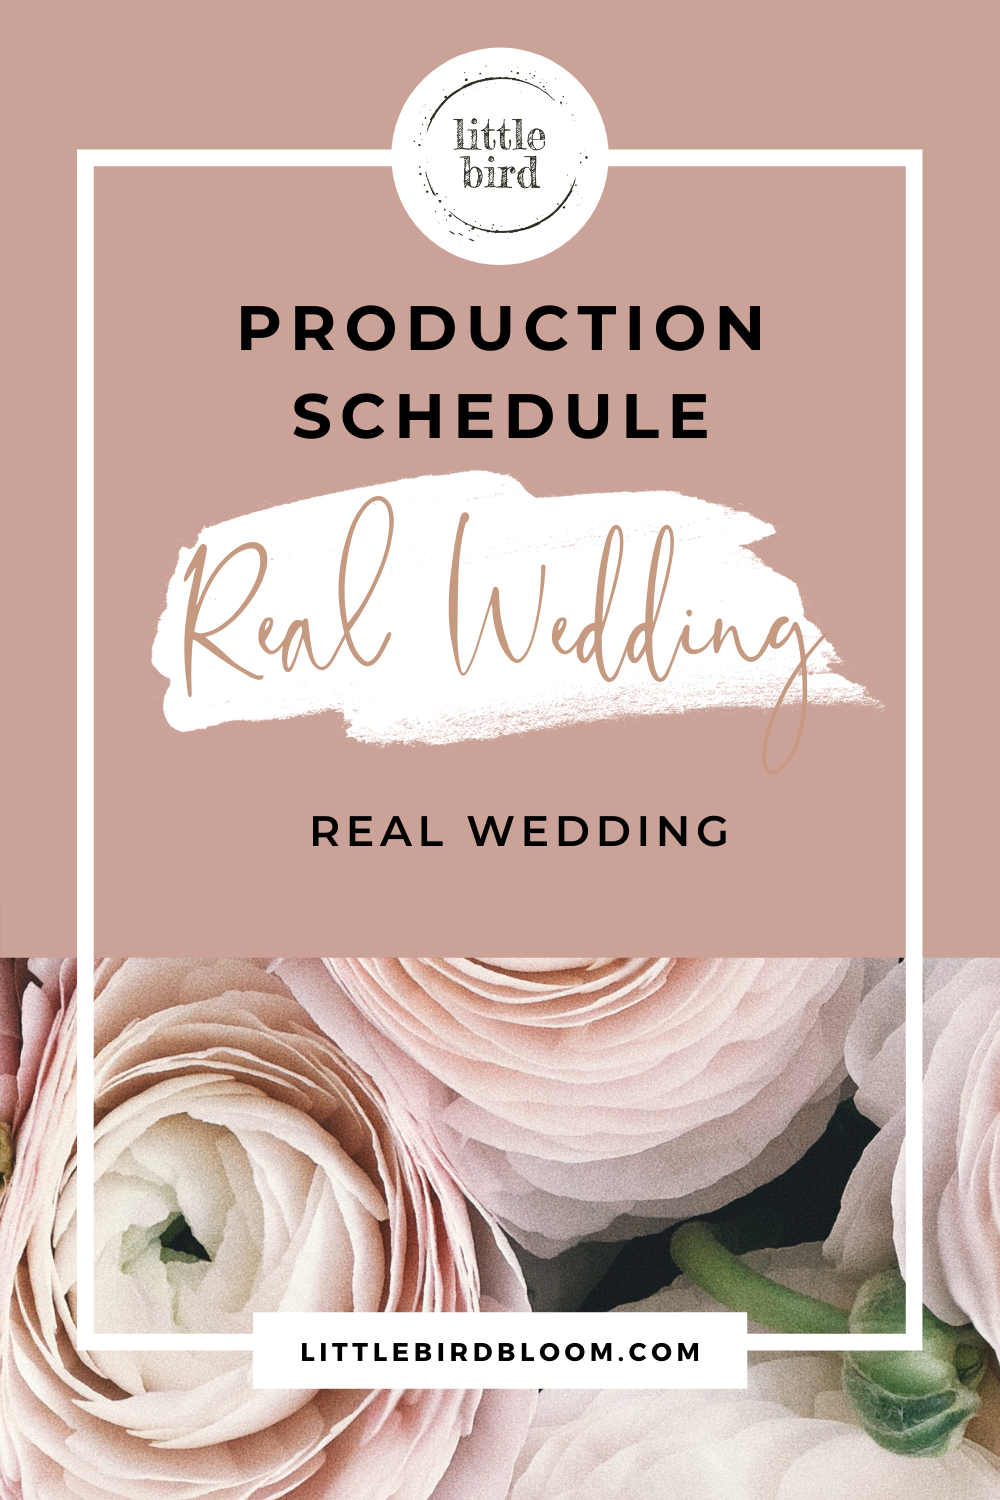 example production schedule for a real wedding